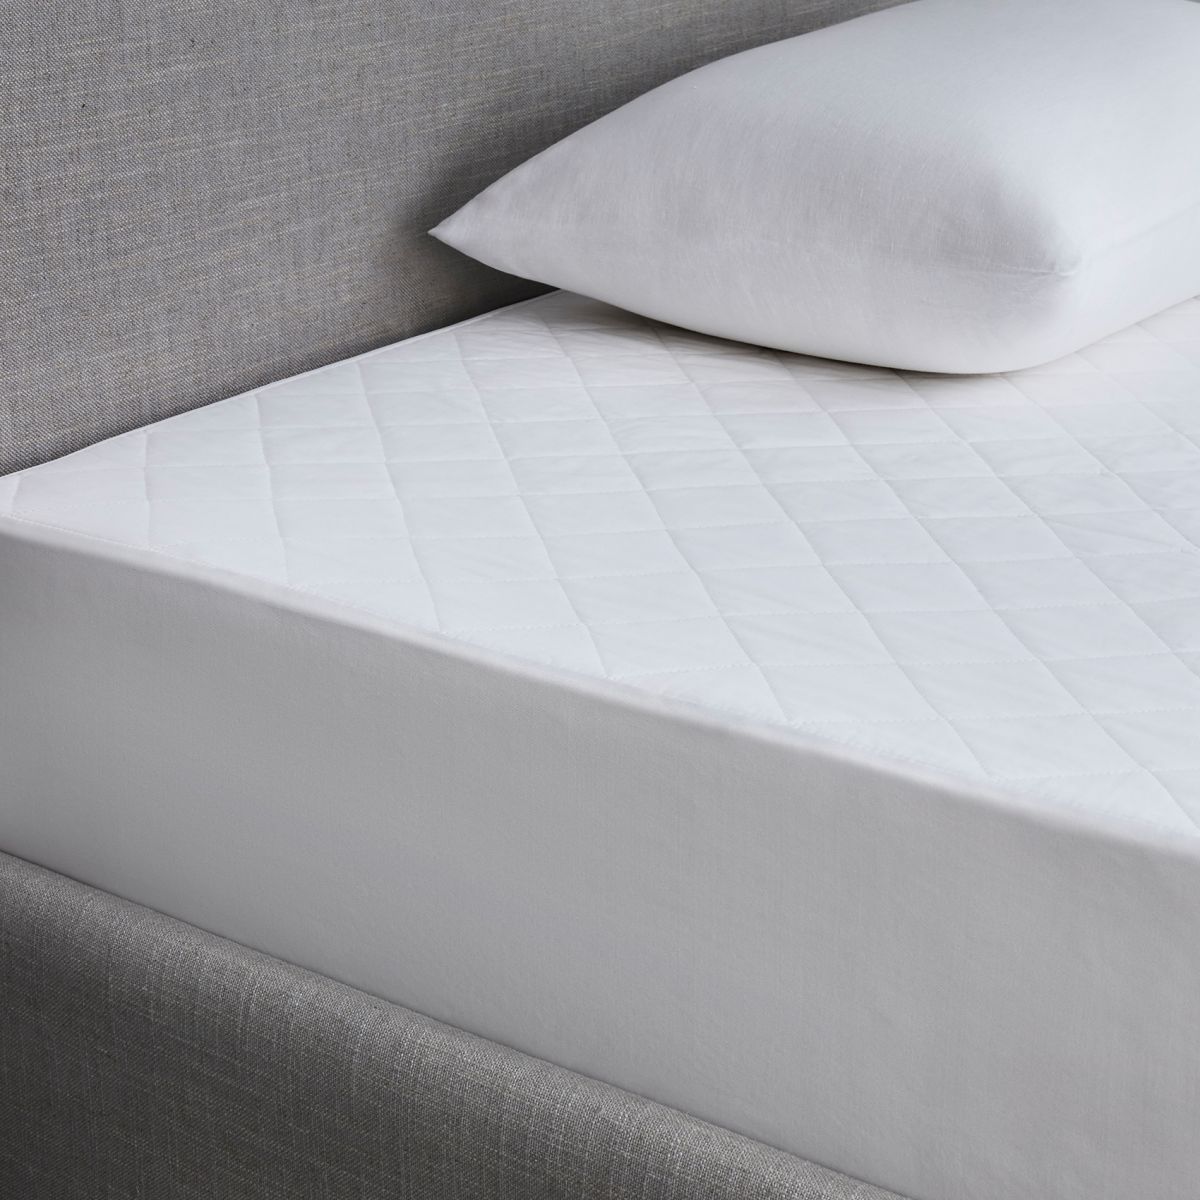 NEW LUXURY QUILTED MATTRESS BED PROTECTOR TOPPERS ALL SIZES CHEAP PRICE SALE 